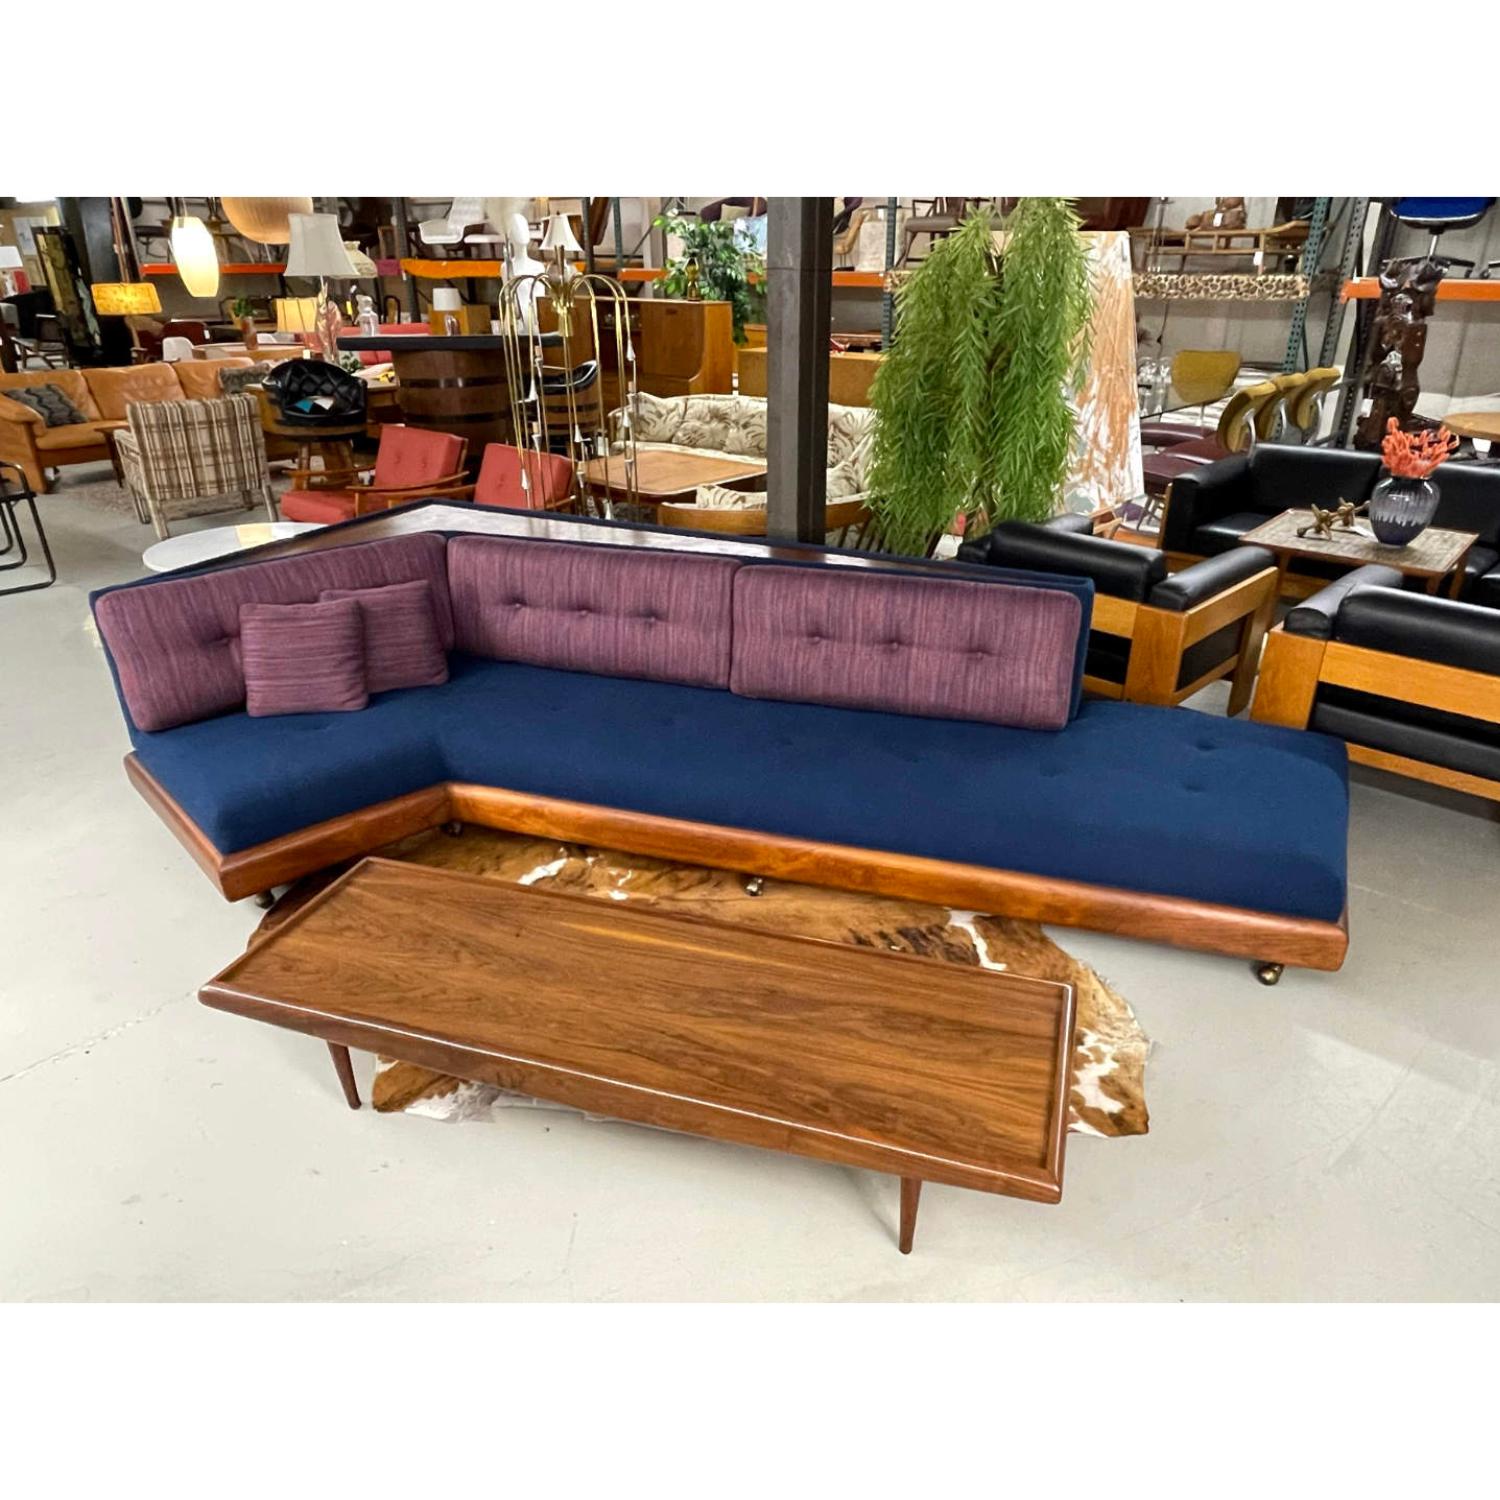 This listing is for the sofa alone. The coffee table is sold separately, inquire if interested.

What's better than vintage original?  Upholstery that actually works for today's decorators.  This original two-tone fabric combination has a timeless